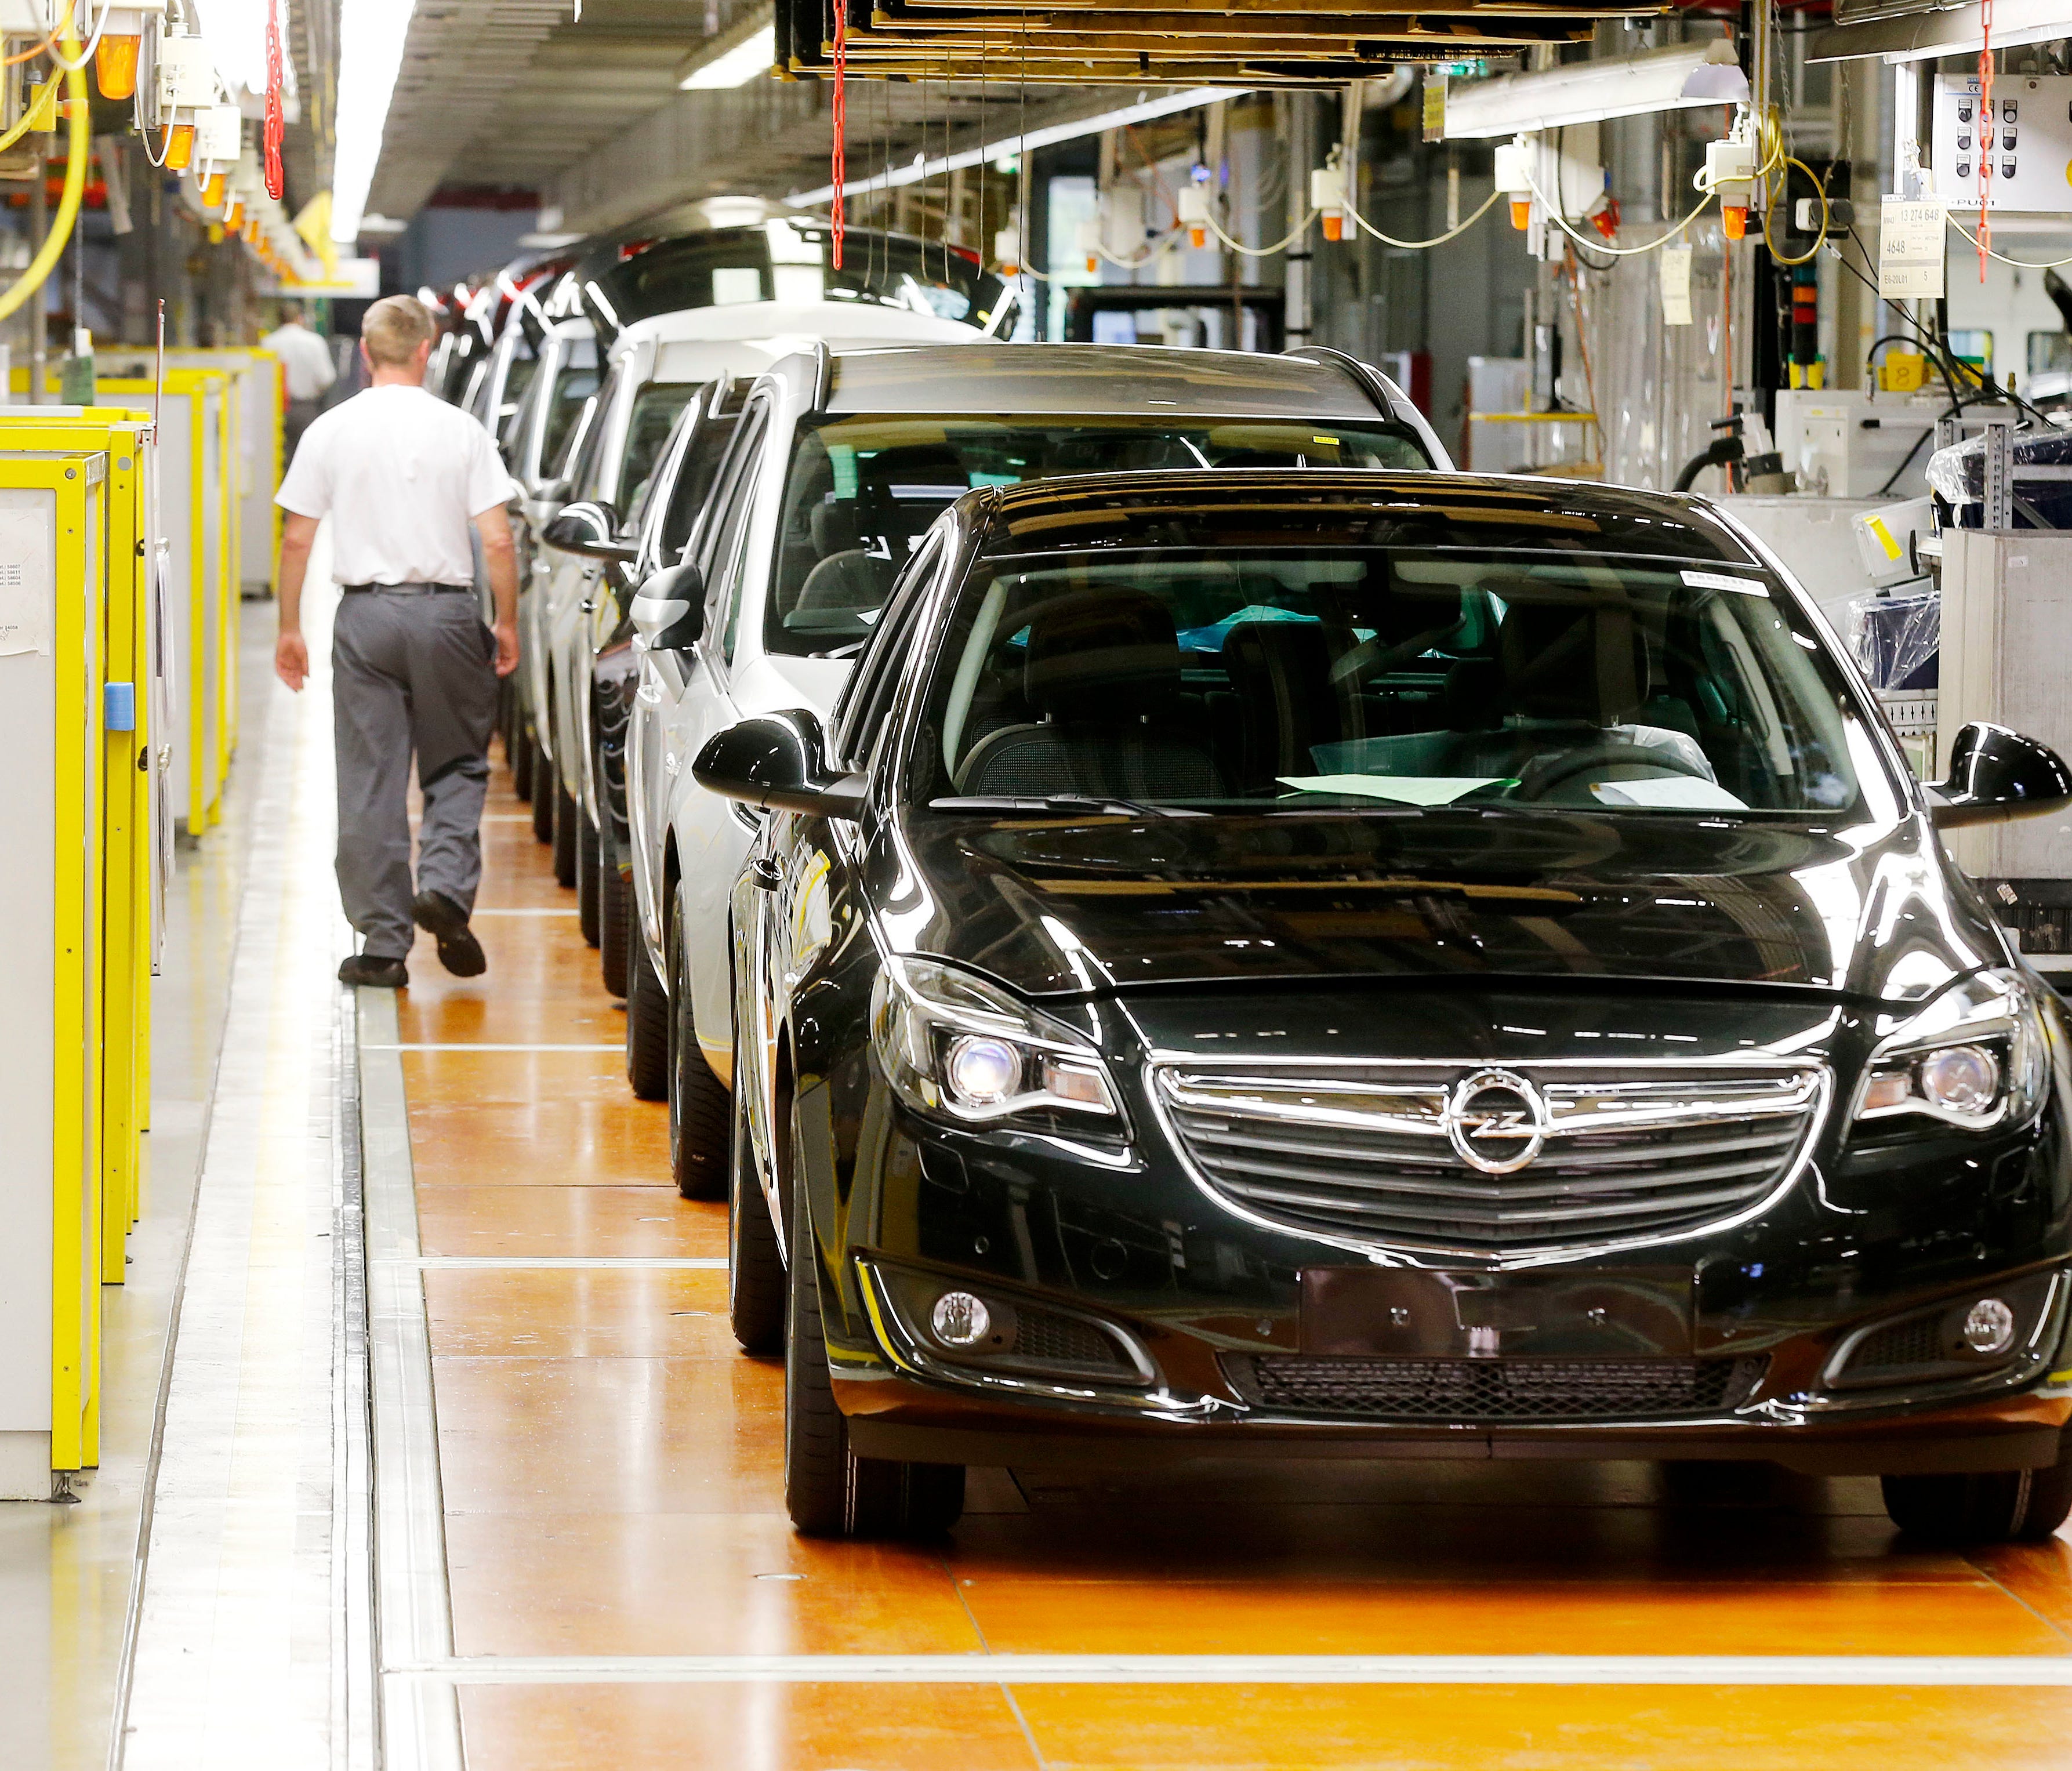 Opel cars stand on the assembly line in the Opel car manufactory in Ruesselsheim, Germany. European automakers Opel and Vauxhall say there'll be no forced layoffs and all of their current plants will be maintained as they look to a new future under F